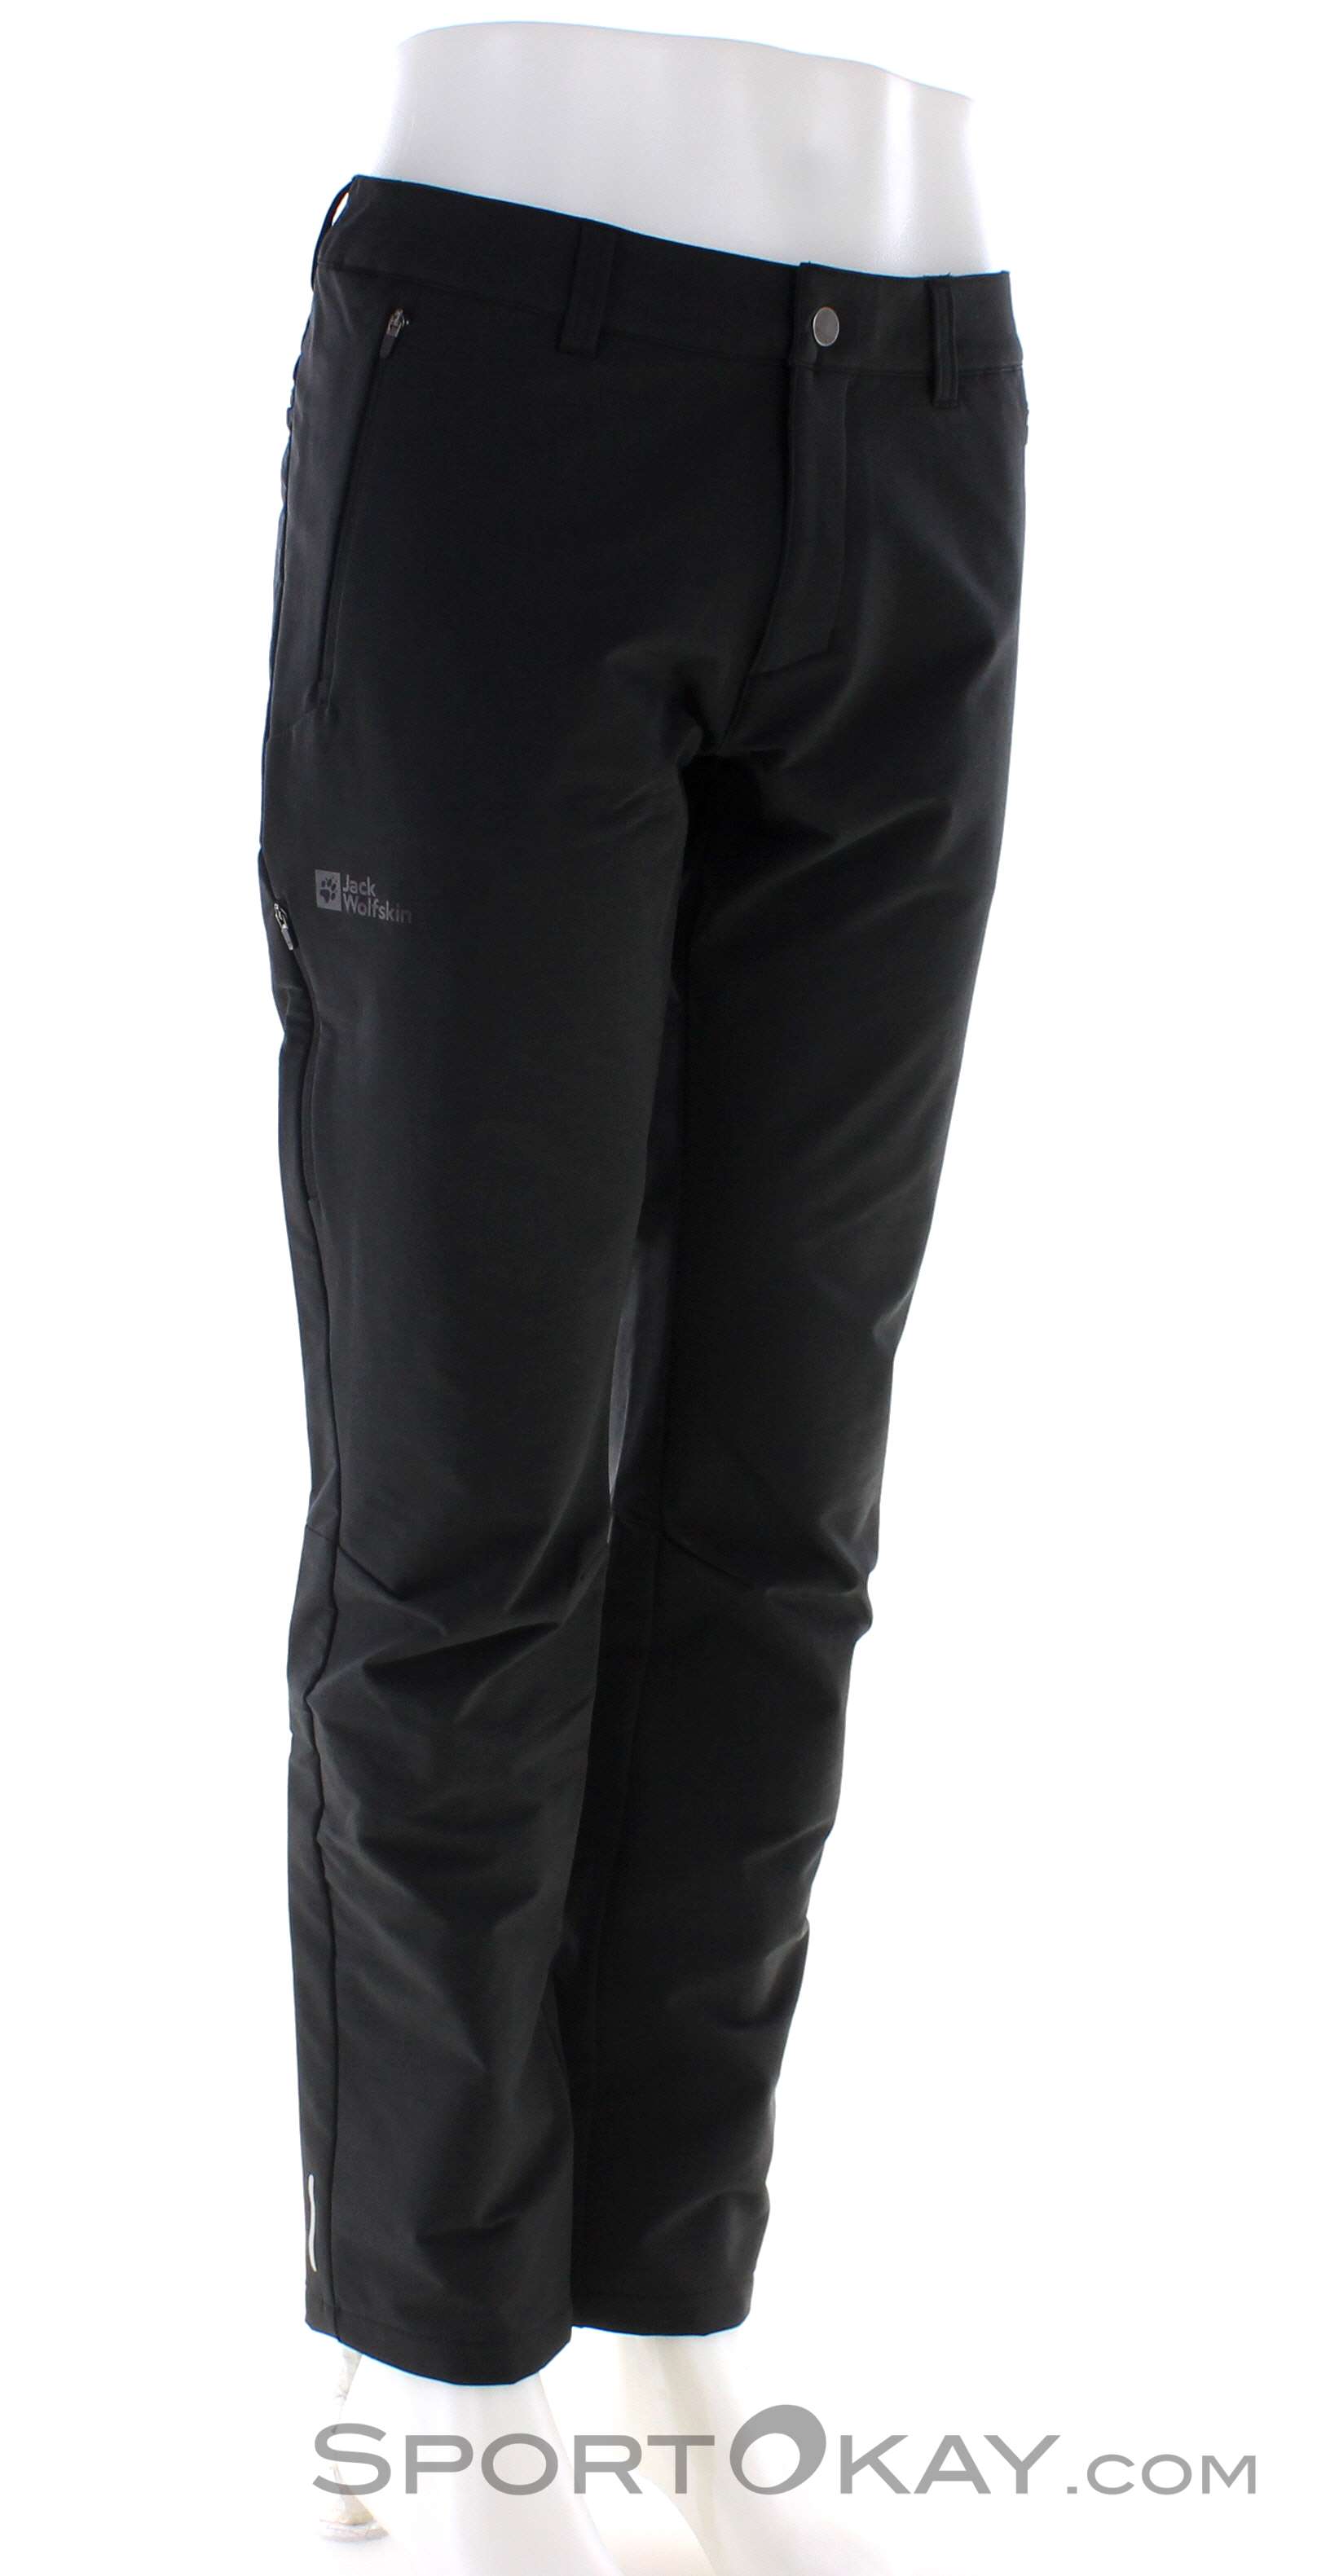 Jack Wolfskin Outdoor Pants Activate Clothing Pants - - - All Mens Thermic - Outdoor Outdoor